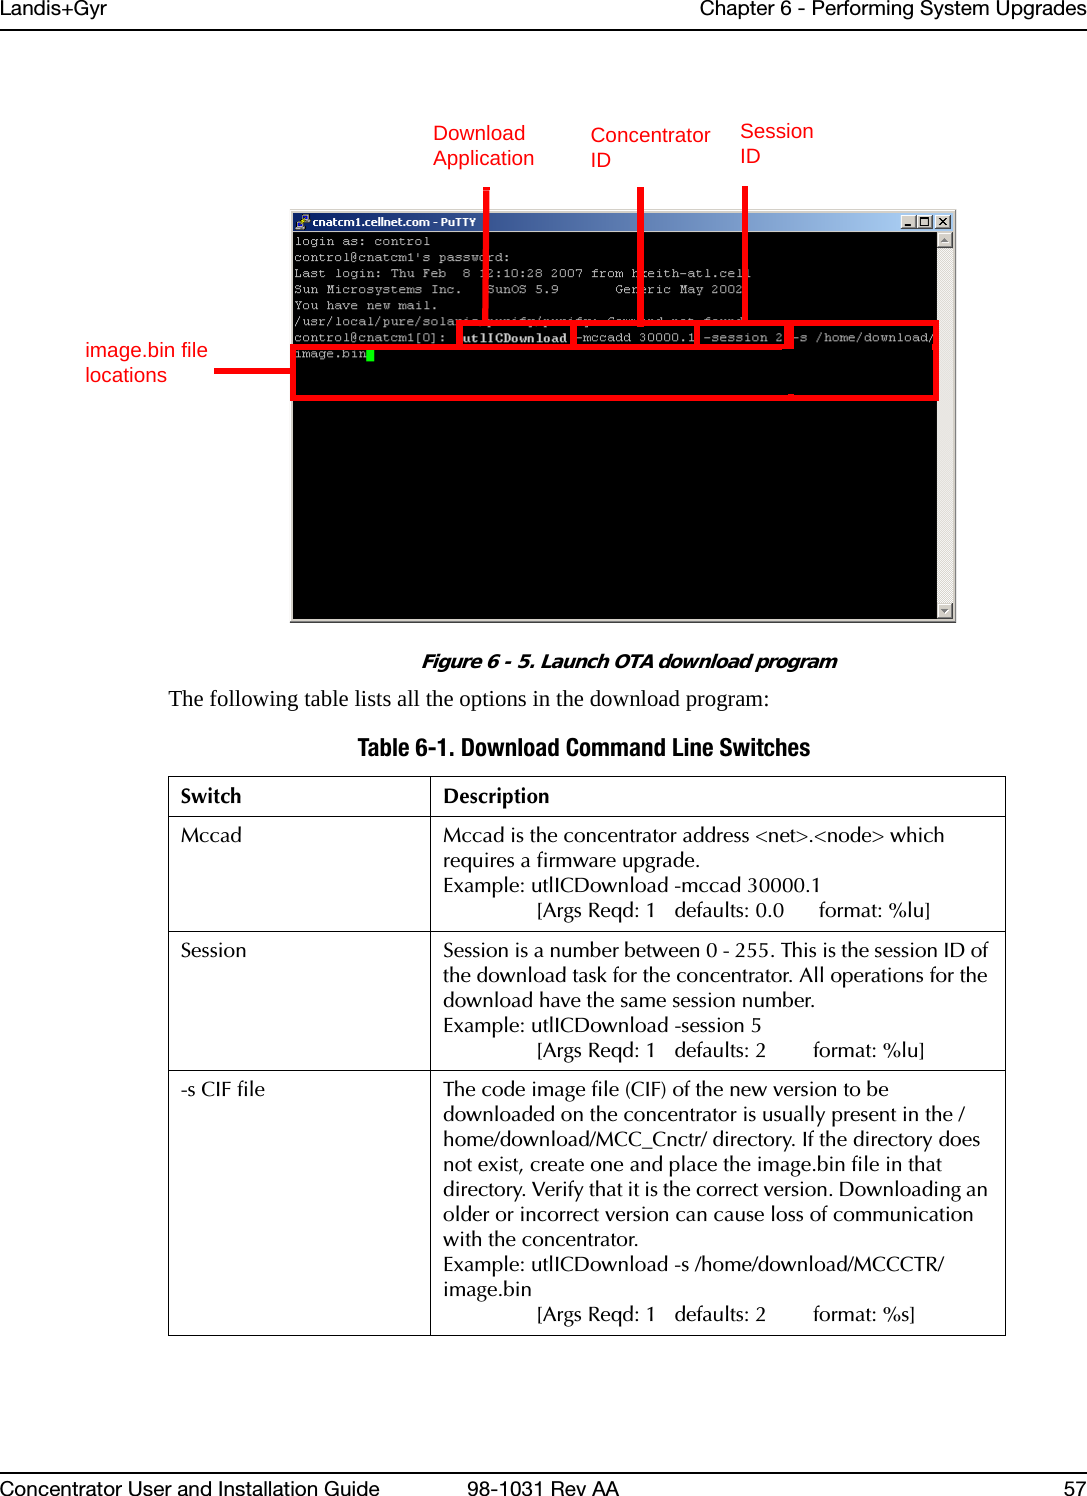 Landis+Gyr Chapter 6 - Performing System UpgradesConcentrator User and Installation Guide 98-1031 Rev AA 57Figure 6 - 5. Launch OTA download programThe following table lists all the options in the download program: DownloadApplication Concentrator IDSession IDimage.bin filelocationsTable 6-1. Download Command Line SwitchesSwitch DescriptionMccad Mccad is the concentrator address &lt;net&gt;.&lt;node&gt; which requires a firmware upgrade.Example: utlICDownload -mccad 30000.1                [Args Reqd: 1   defaults: 0.0      format: %lu]Session Session is a number between 0 - 255. This is the session ID of the download task for the concentrator. All operations for the download have the same session number.Example: utlICDownload -session 5                [Args Reqd: 1   defaults: 2        format: %lu]-s CIF file The code image file (CIF) of the new version to be downloaded on the concentrator is usually present in the /home/download/MCC_Cnctr/ directory. If the directory does not exist, create one and place the image.bin file in that directory. Verify that it is the correct version. Downloading an older or incorrect version can cause loss of communication with the concentrator.Example: utlICDownload -s /home/download/MCCCTR/image.bin                [Args Reqd: 1   defaults: 2        format: %s]